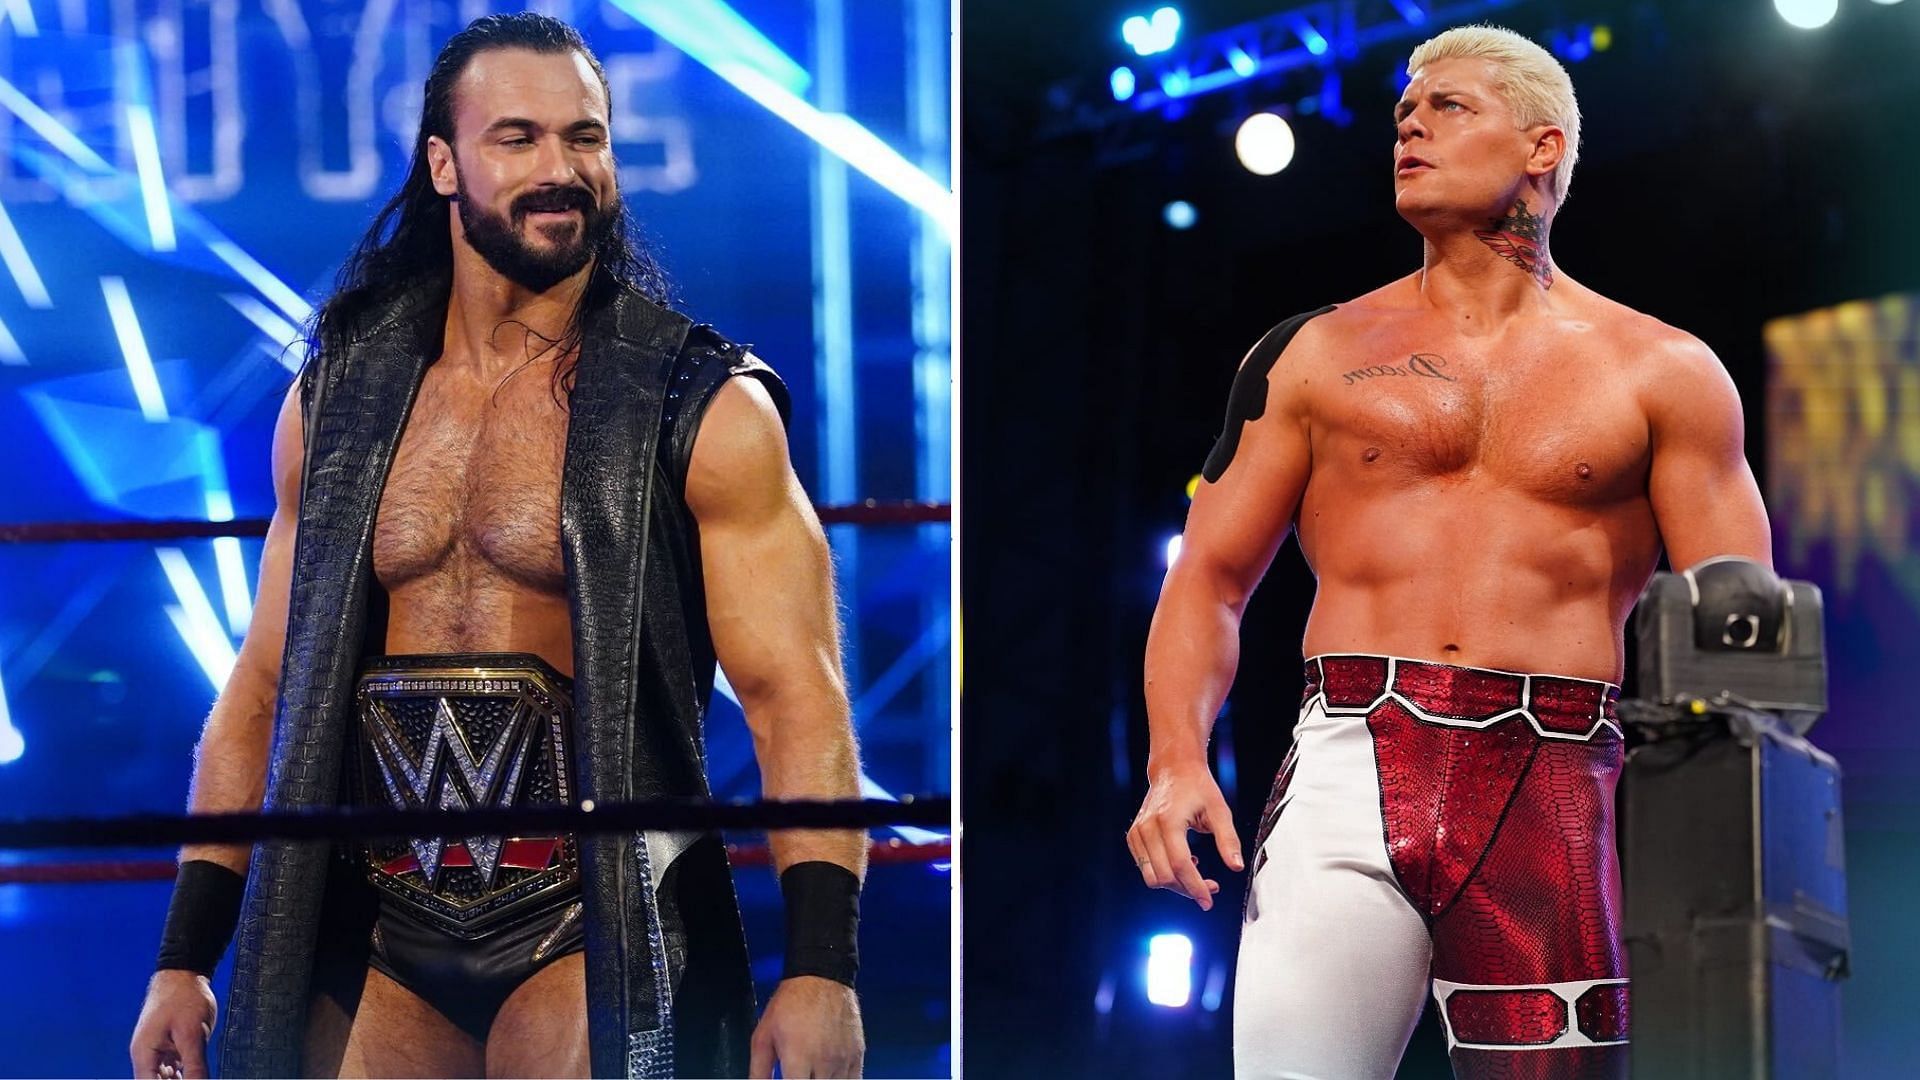 Drew McIntyre versus Cody Rhodes will be a great matchup